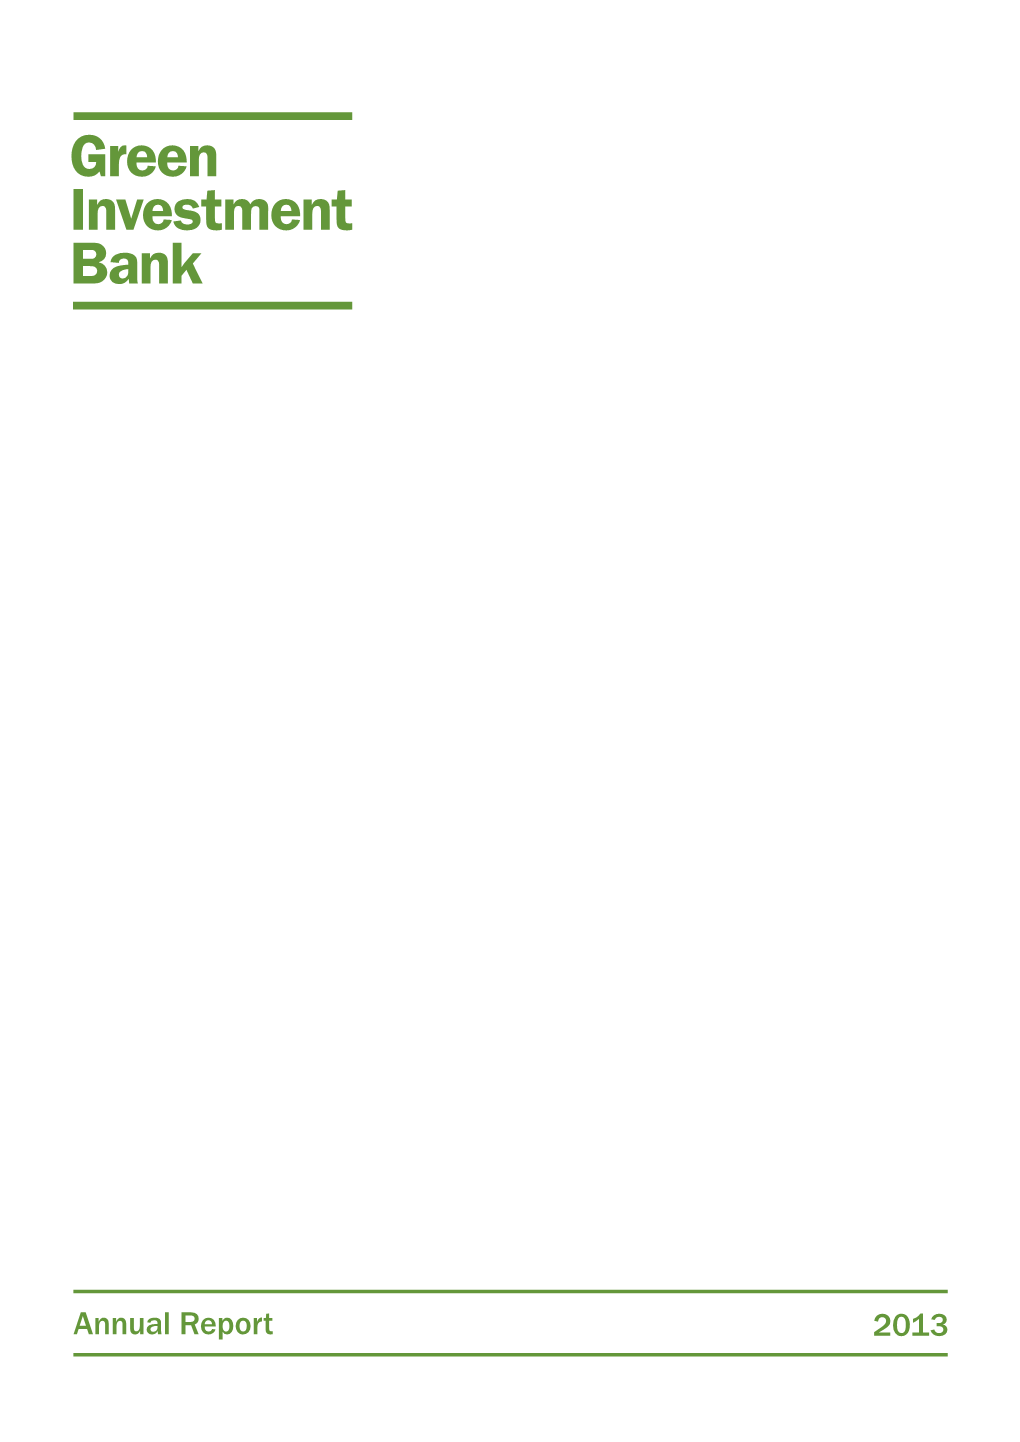 Green Investment Bank Annual Report 2013